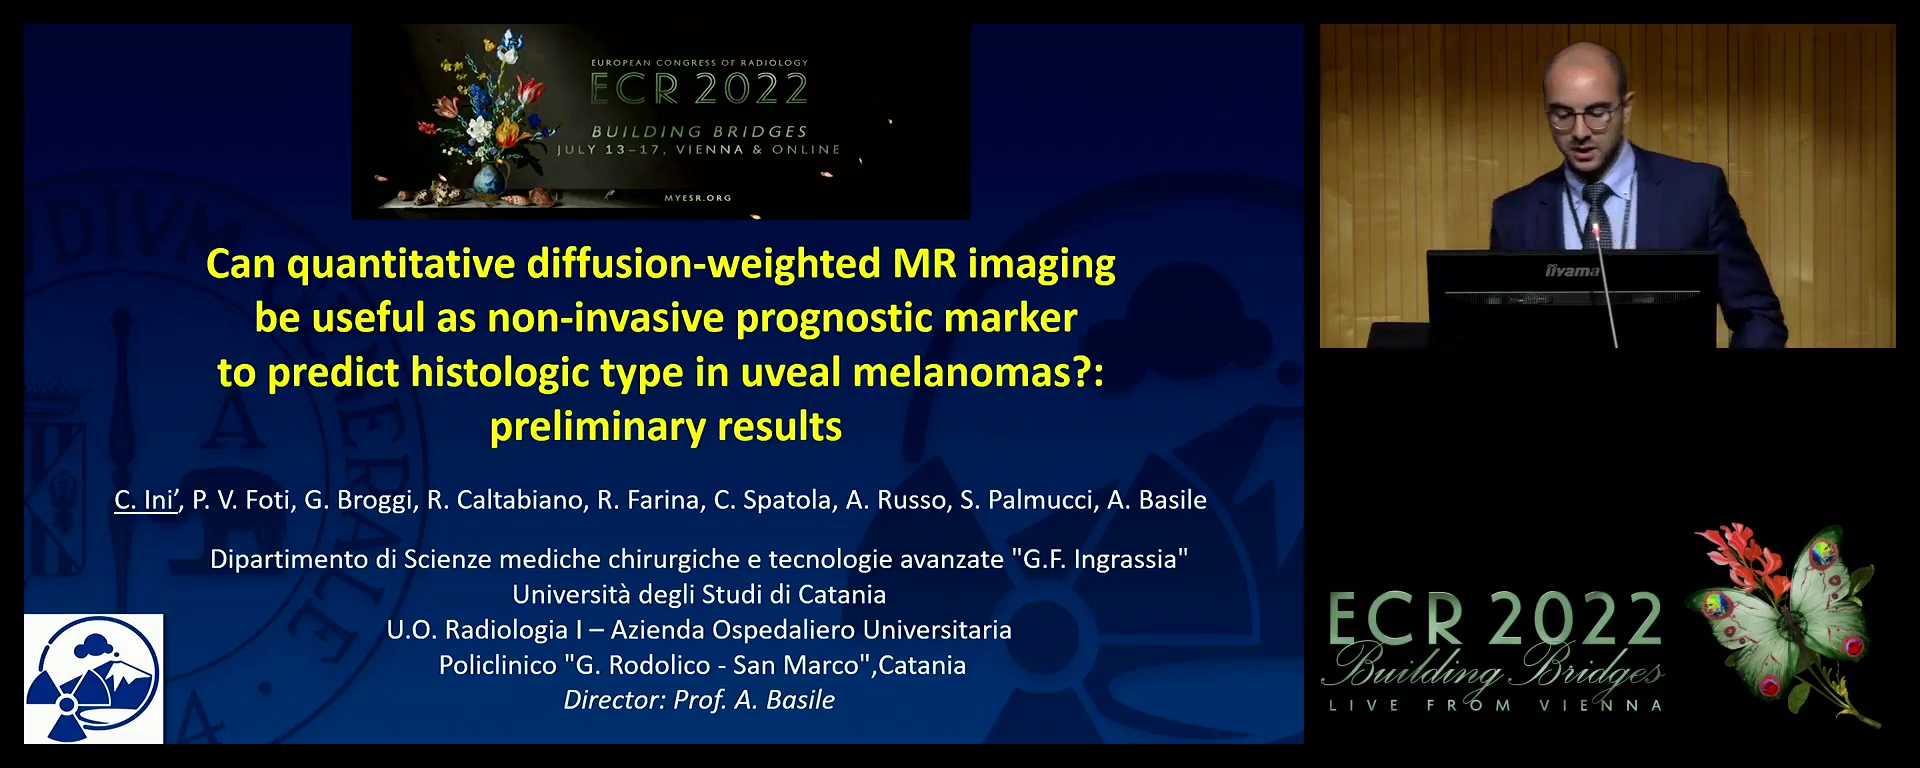 Can quantitative diffusion-weighted MR imaging be useful as non-invasive prognostic marker to predict histologic type in uveal melanomas?: preliminary results